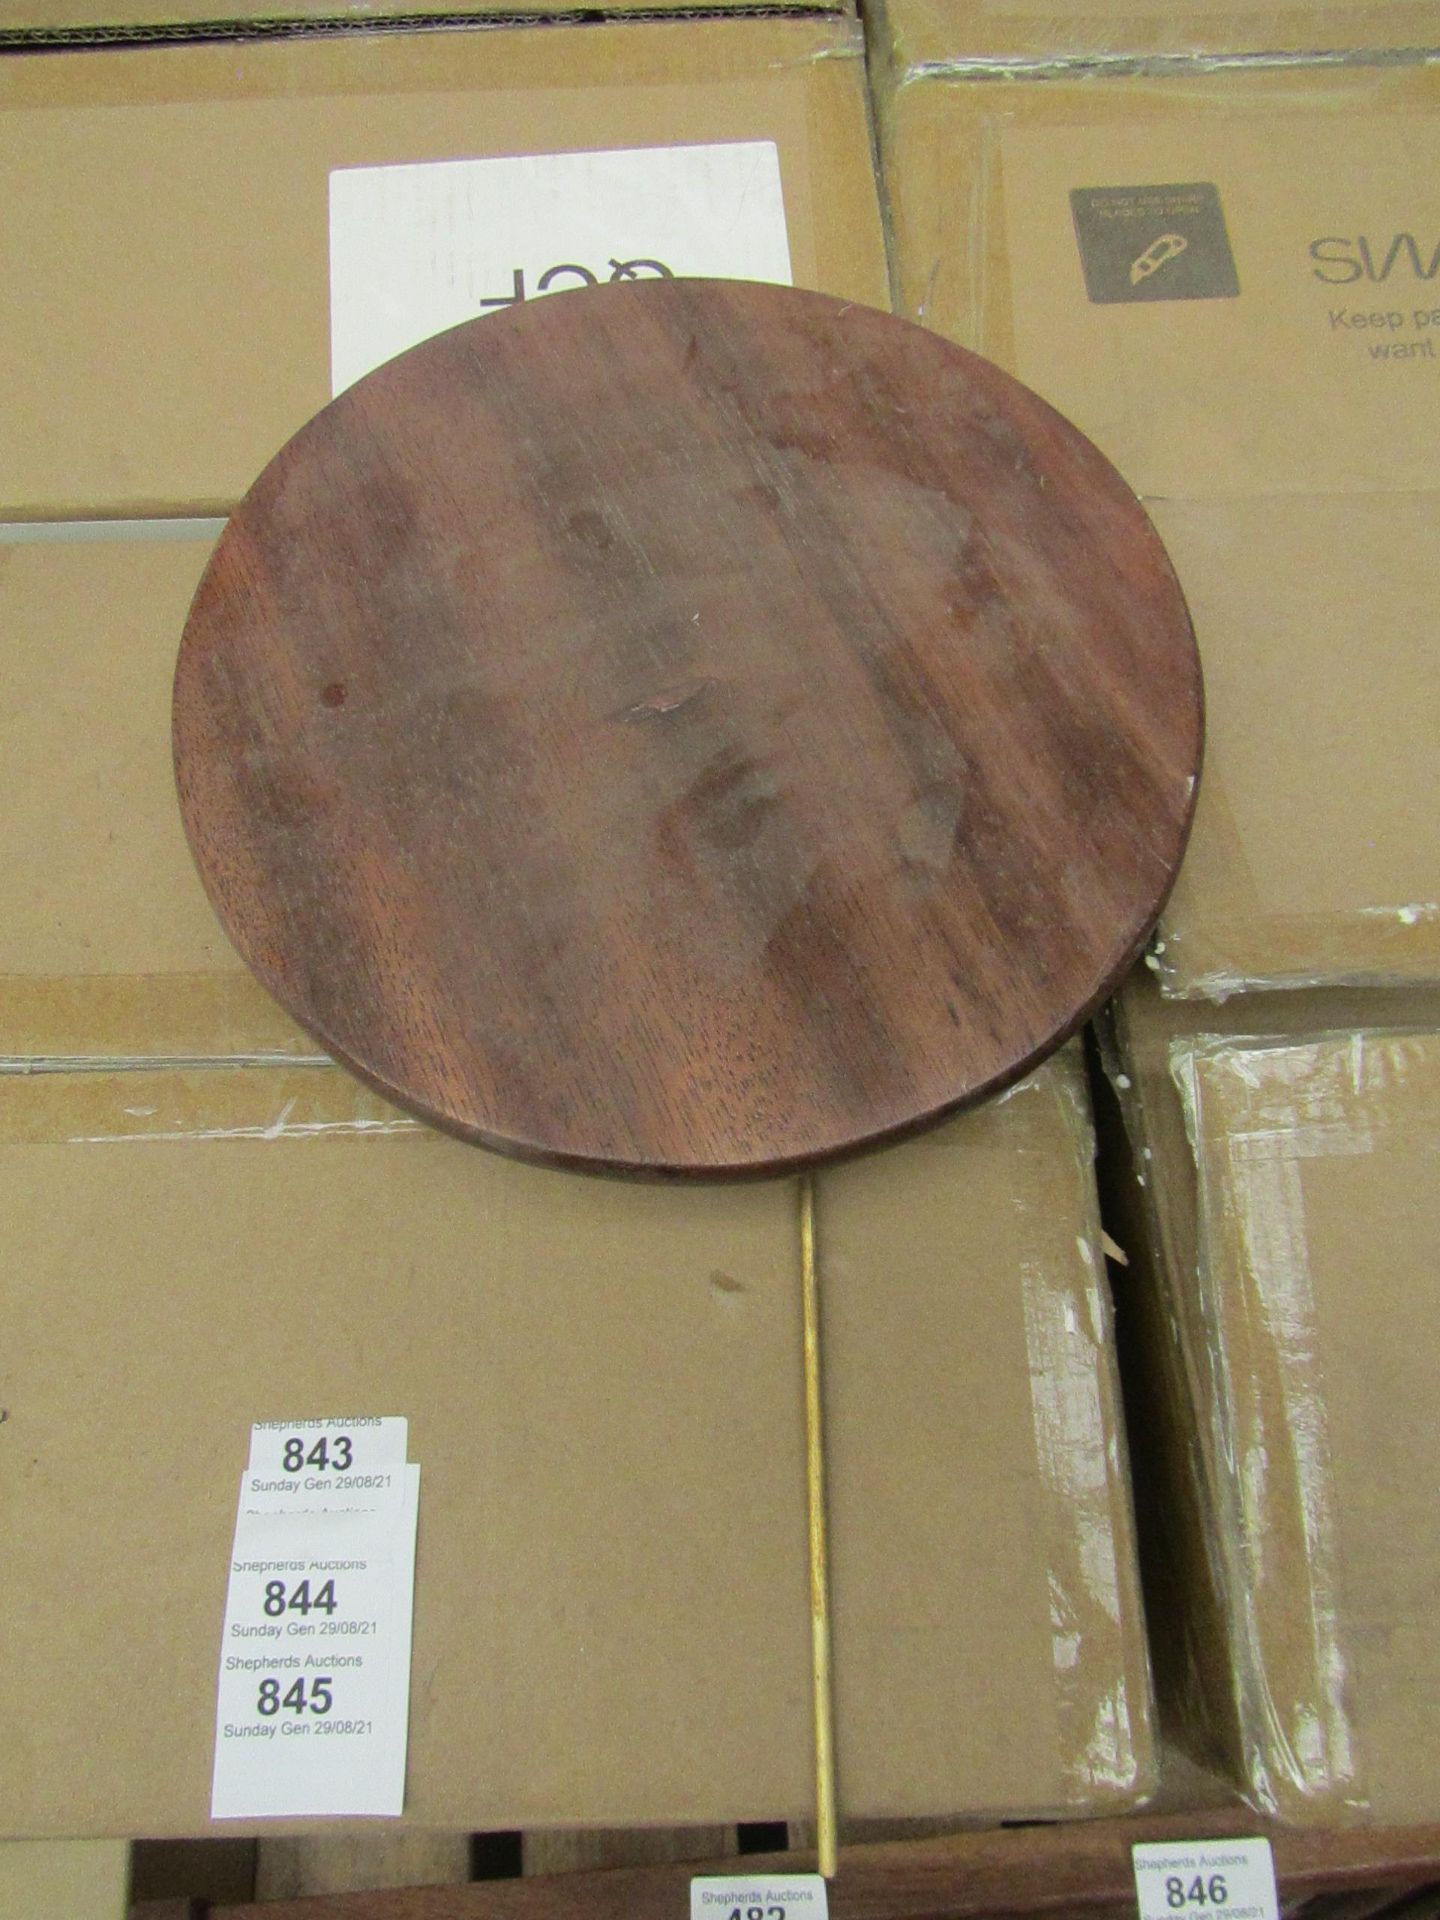 | 2X | SWOON LUNE WALL LIGHT IN WALNUT | LOOKS UNUSED AND BOXED | RRP £79 | TOTAL RRP £158 |